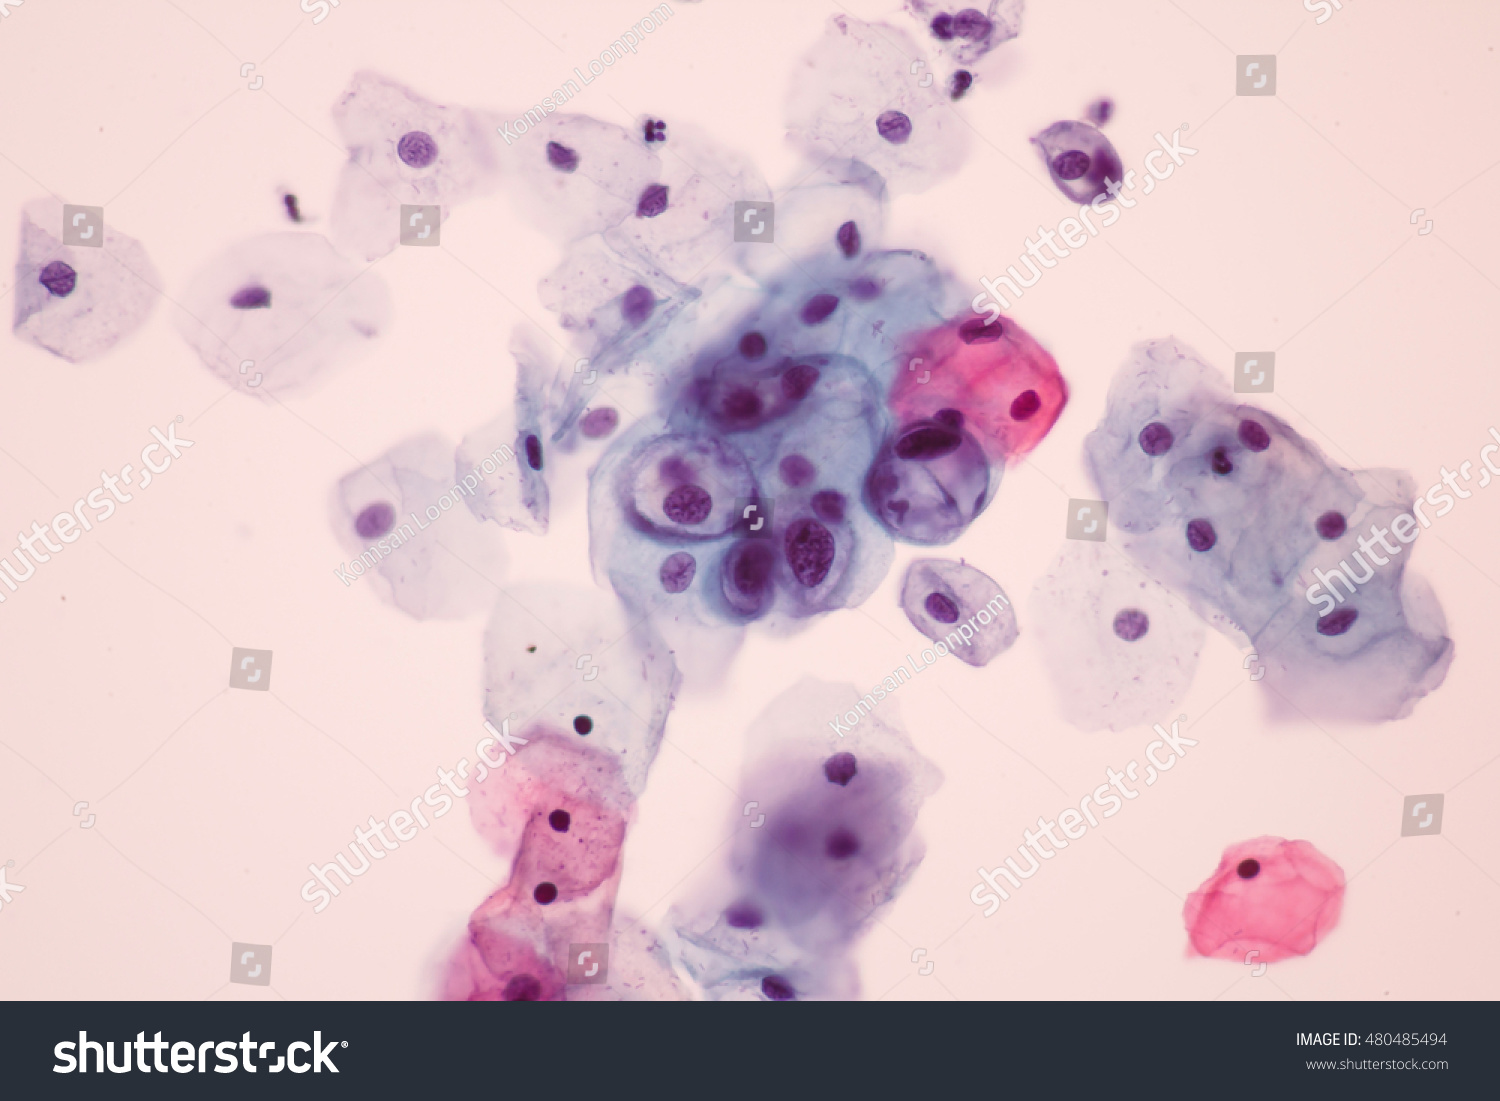 Hpv atypical squamous cells